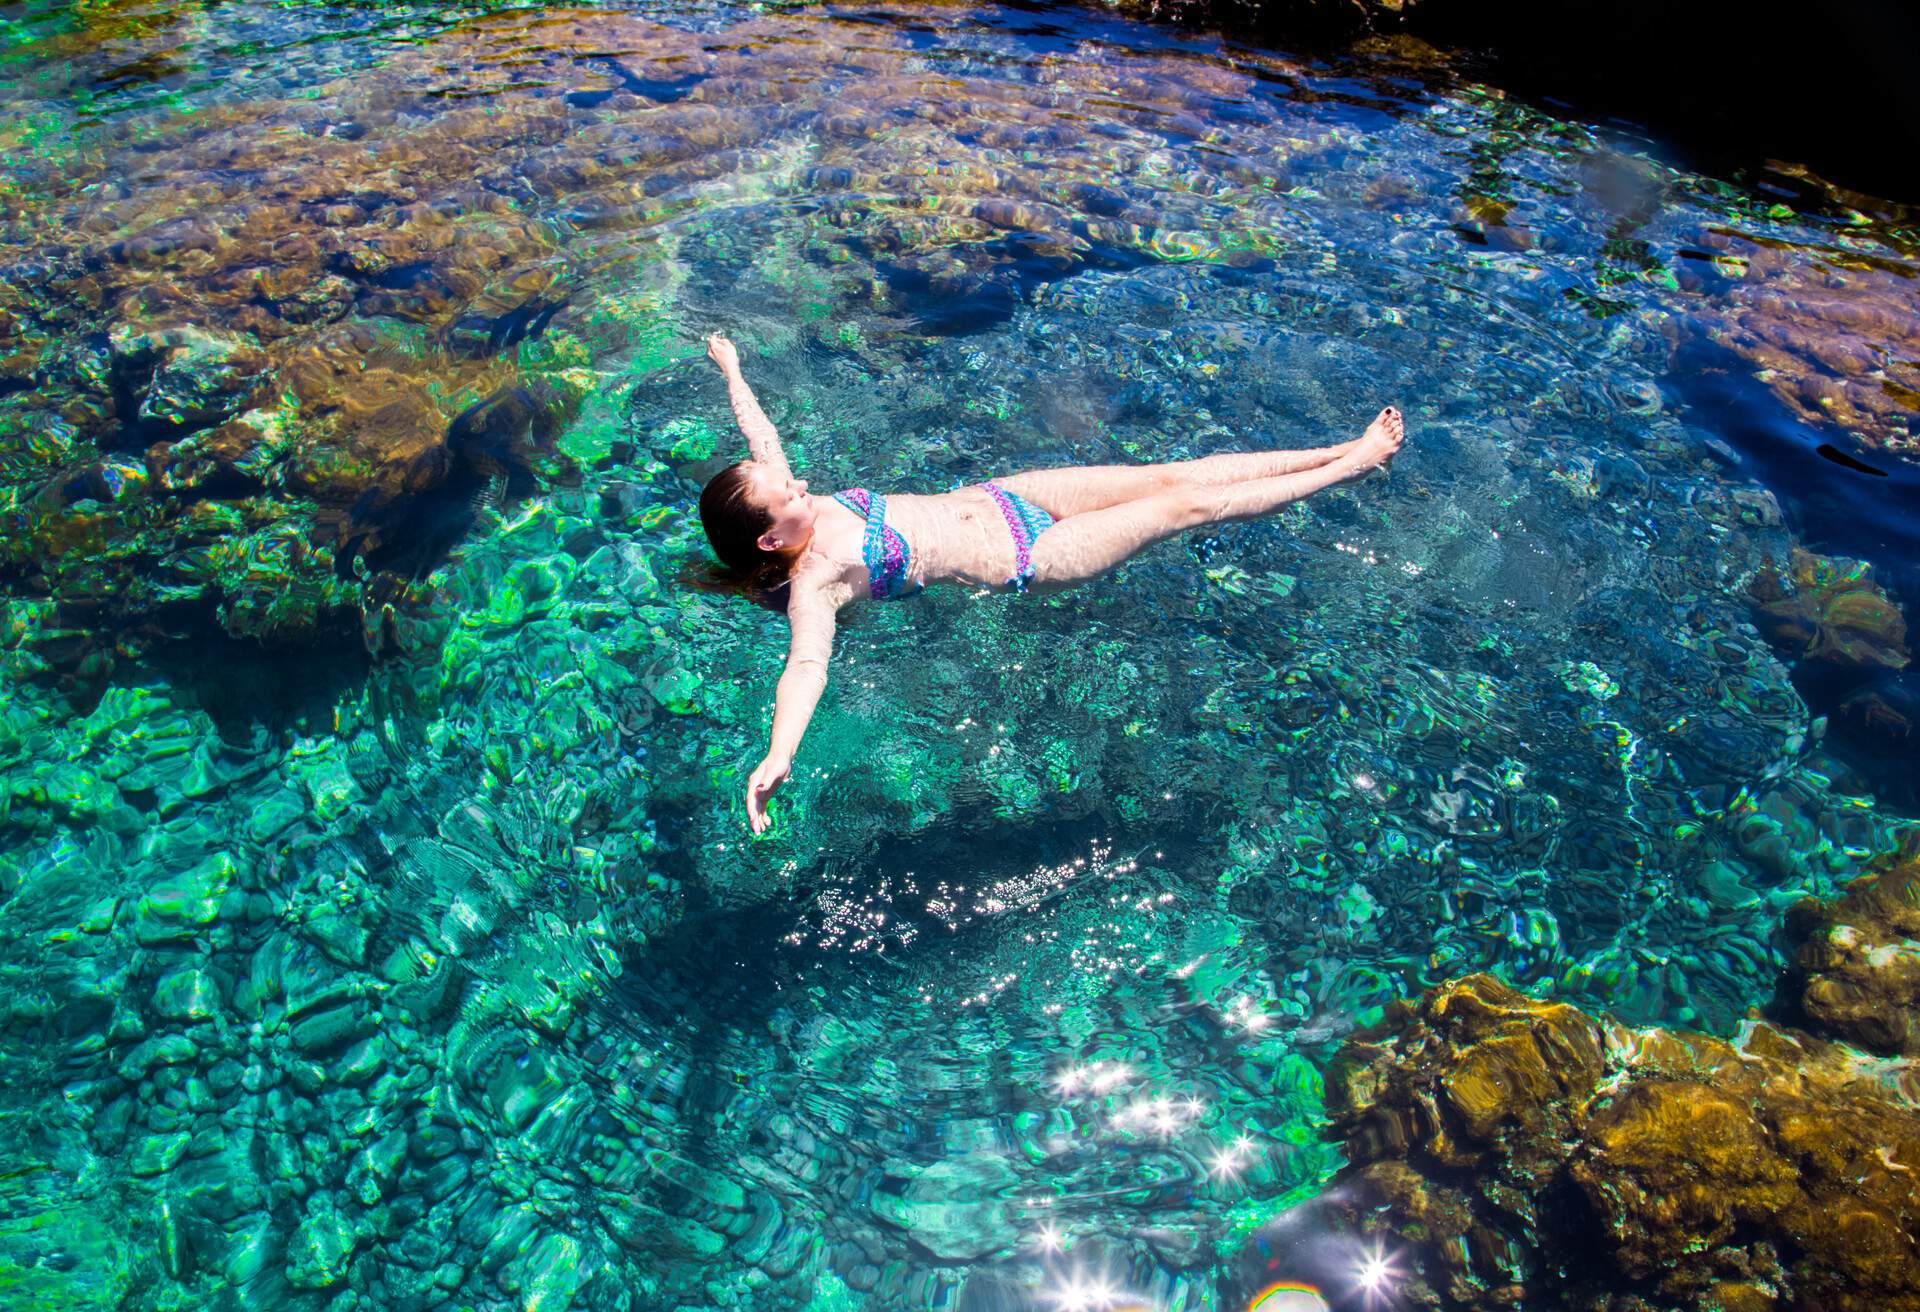 DEST_SPAIN_TENERIFE_NATURAL_POOL_PEOPLE_WOMAN_SWIMMING_FLOATING_GettyImages-682244750